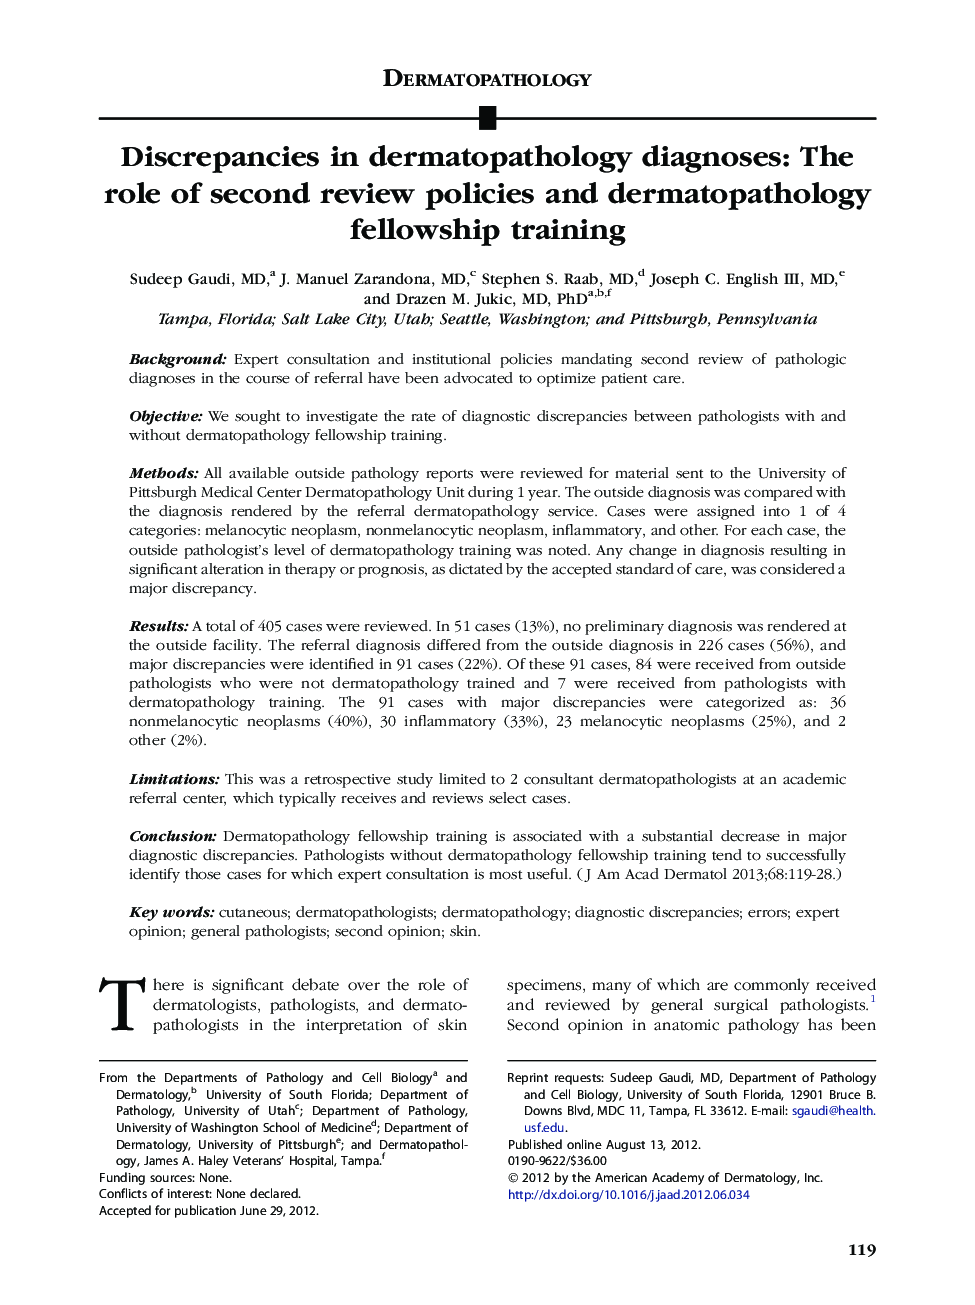 Discrepancies in dermatopathology diagnoses: The role of second review policies and dermatopathology fellowship training 